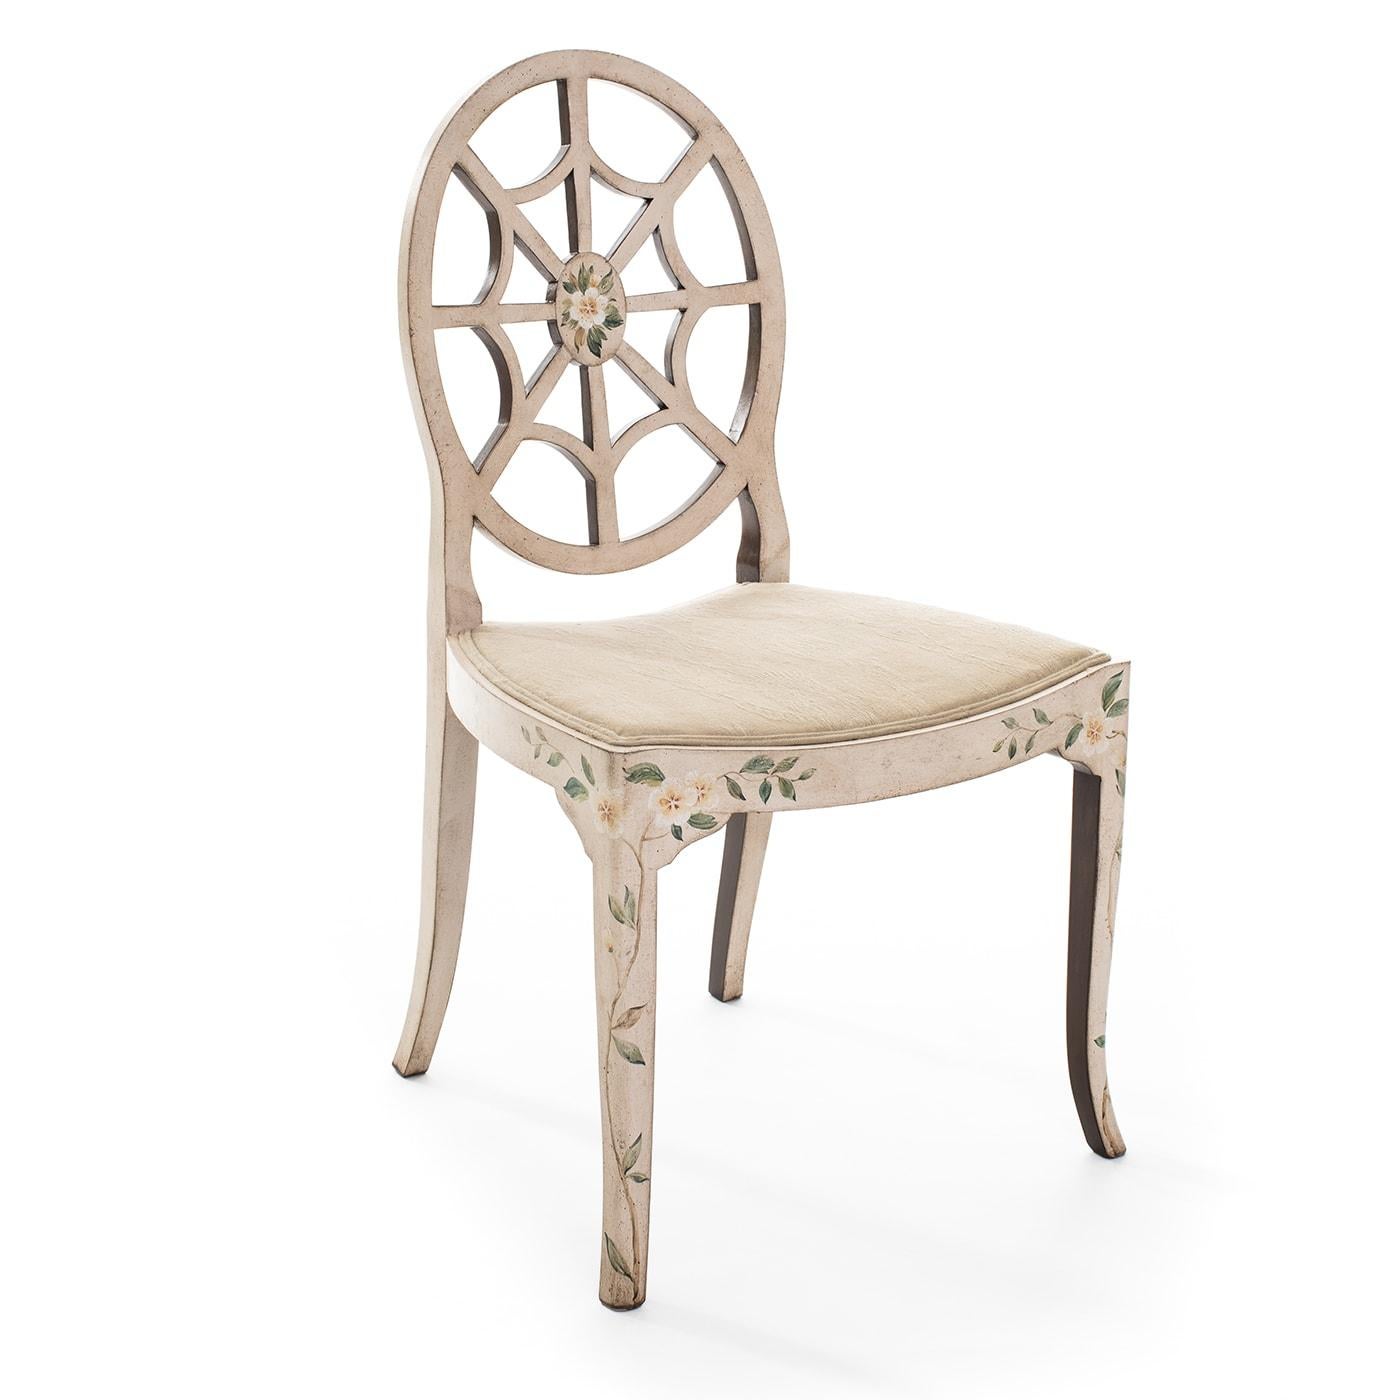 Introducing our distinguished Aquileia Chair, boasting an upholstered seat of exceptional quality. This exquisite dining chair showcases a flawless flex color finish adorned with charming branches and floral decorations. Complete with full